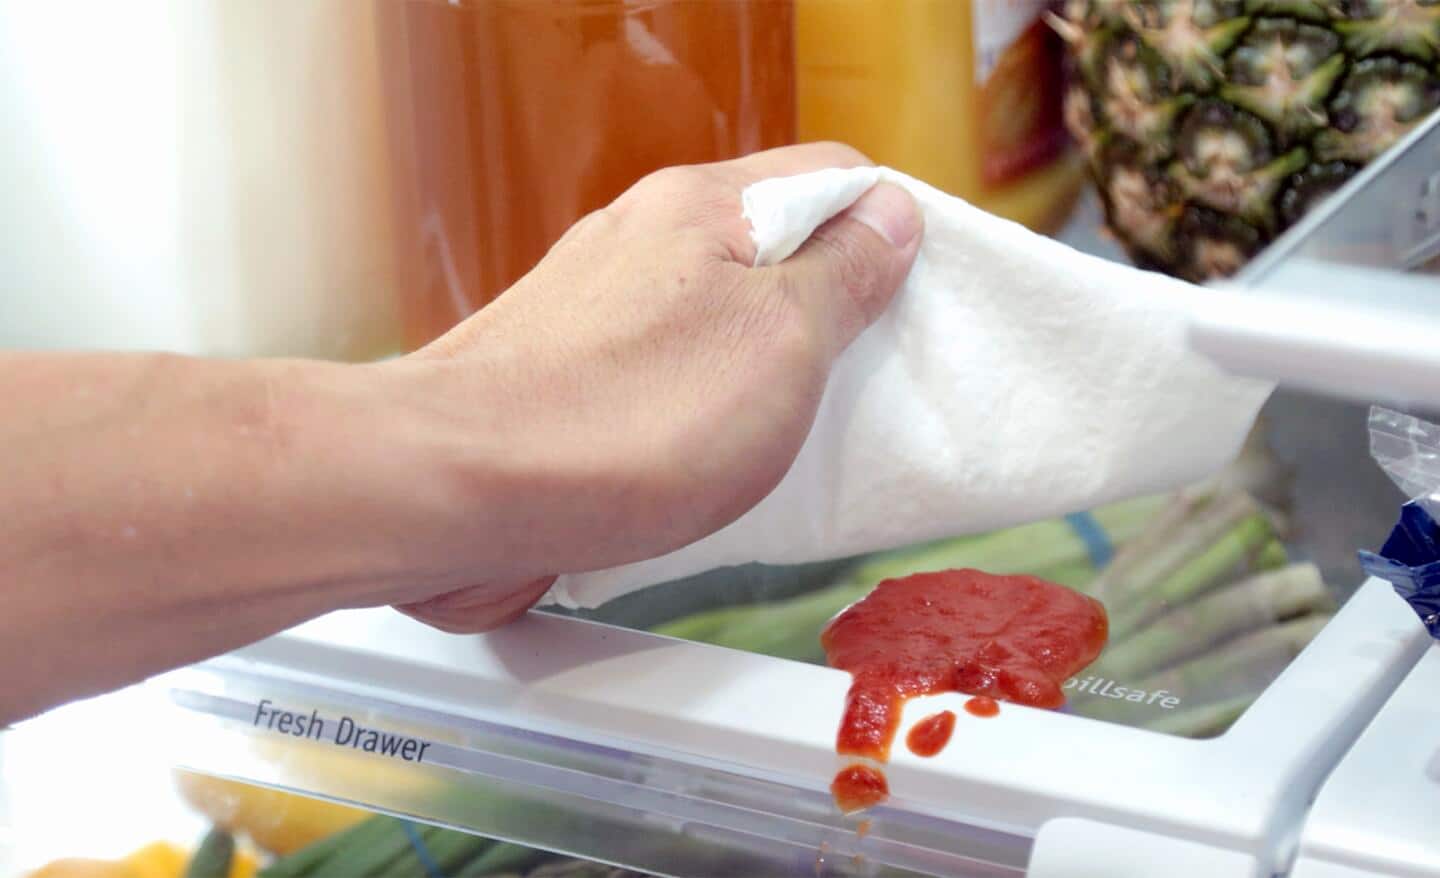 A person uses a cloth to wipe up a spill on an interior refrigerator shelf.